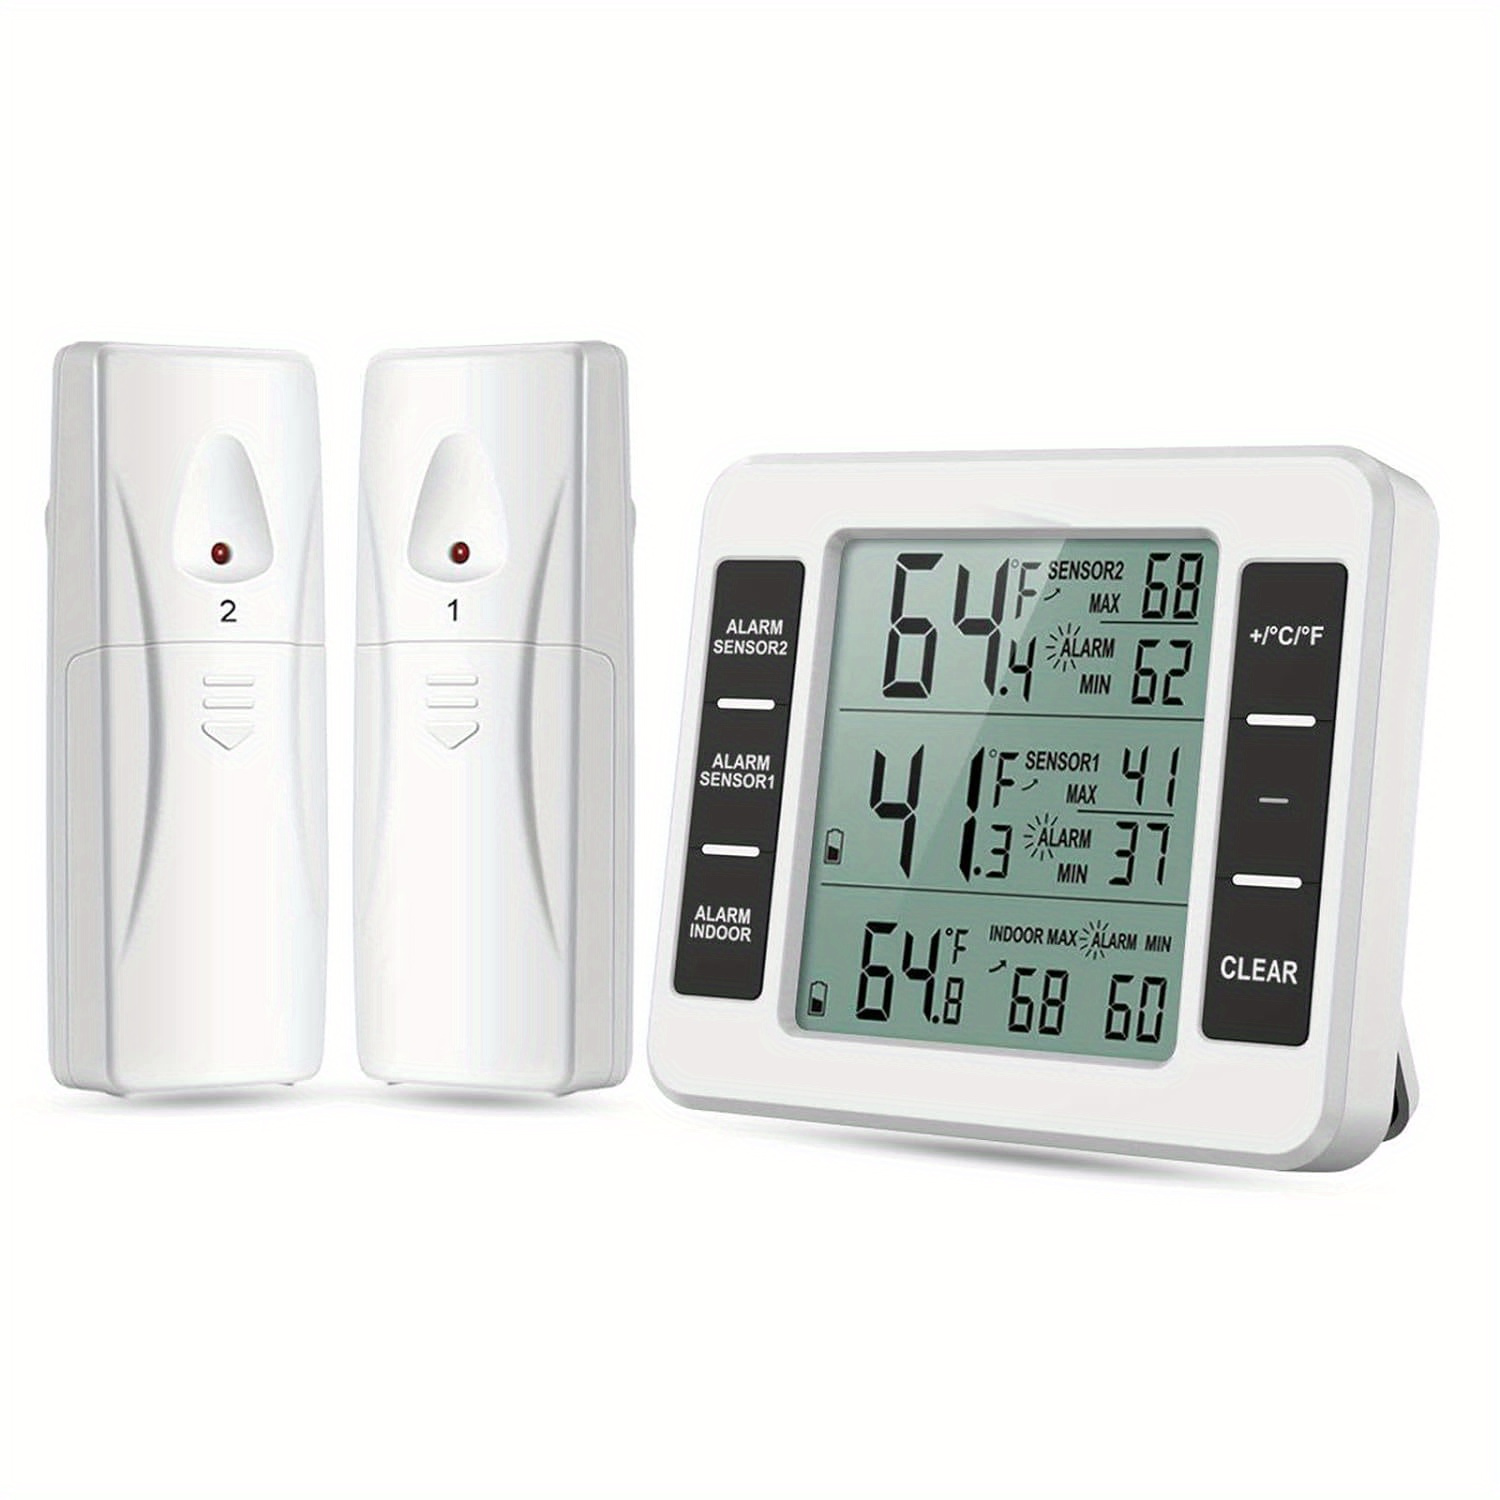 

Refrigerator Thermometer, Digital Fridge Freezer Thermometer Min Temperature Display And 2 Sensors For Home Restaurants Kitchen